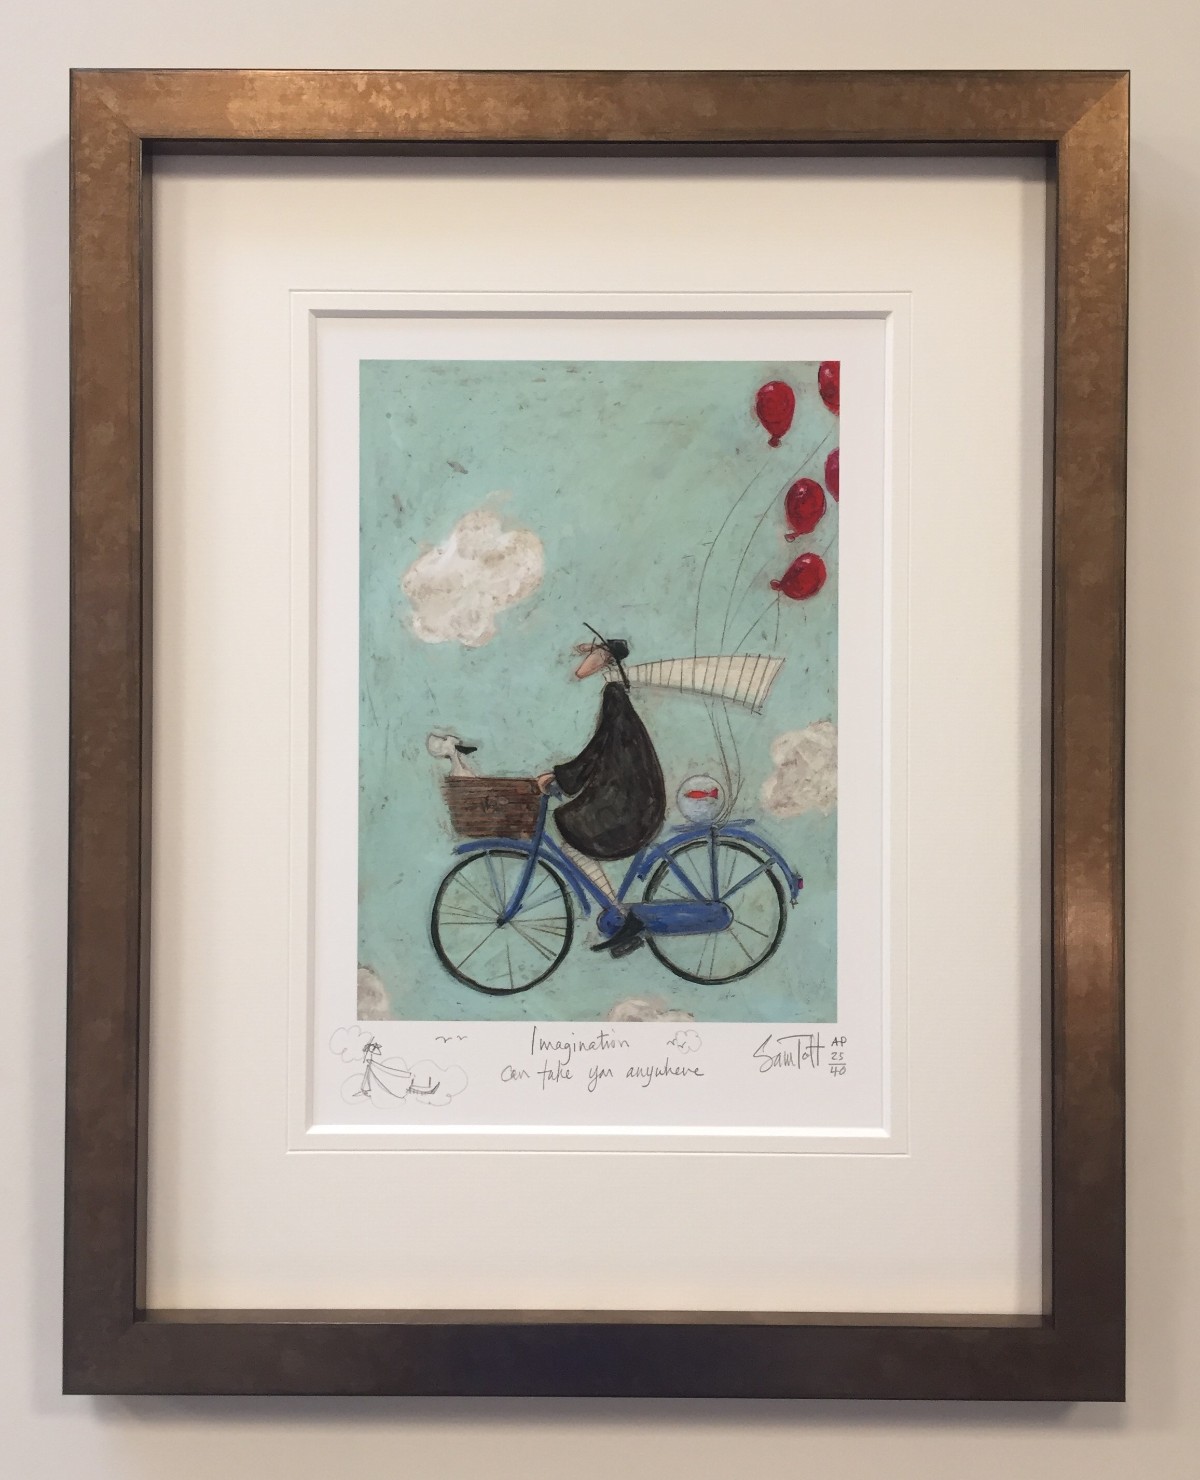 Imagination can take you Anywhere (AP Remarque) by Sam Toft